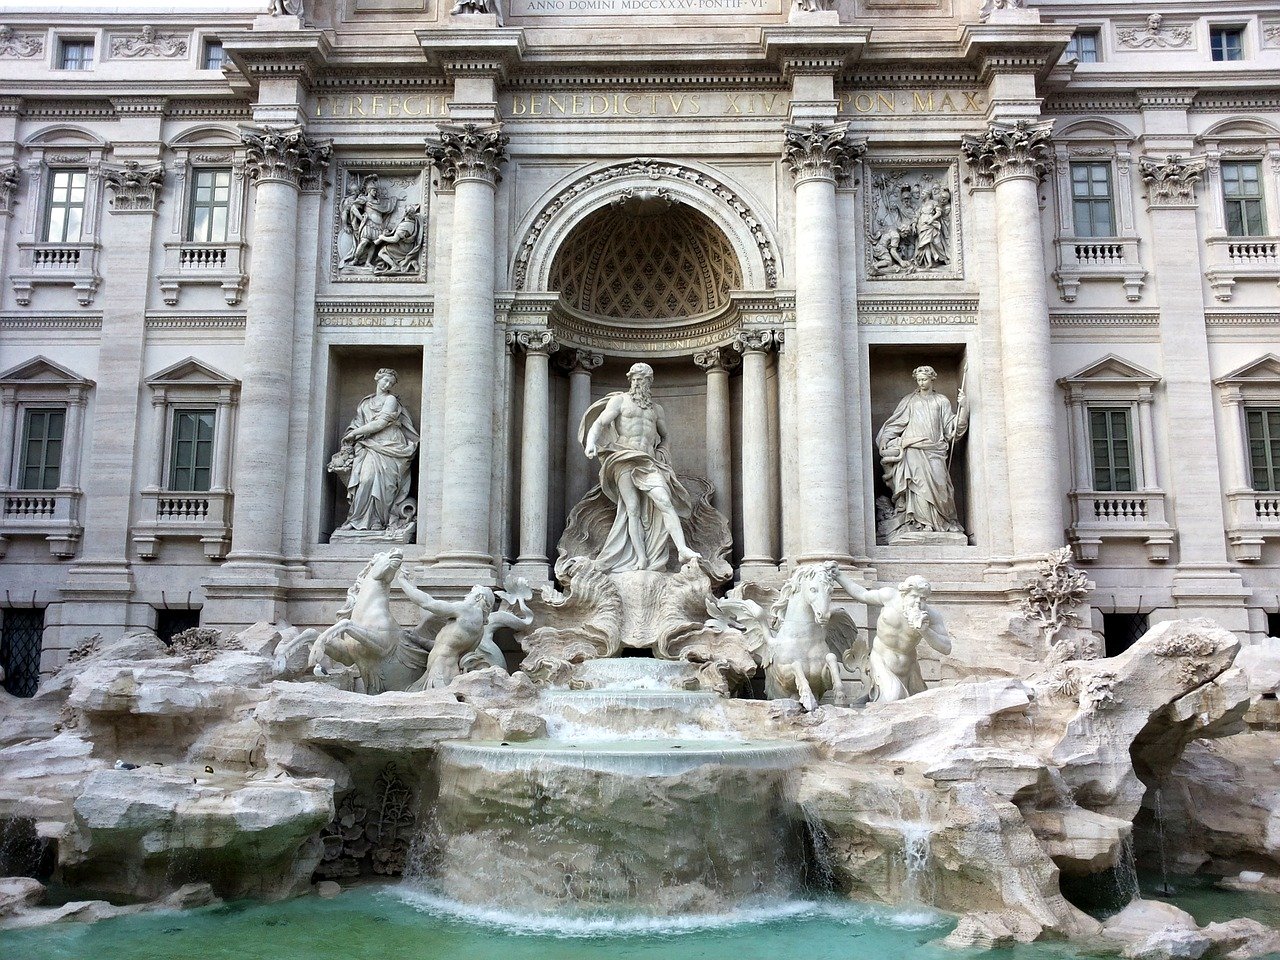 The Trevi Fountain is one of Rome's landmakrs. Discover the best things to do in Rome in 3 days from this 3-day itinerary for Rome.